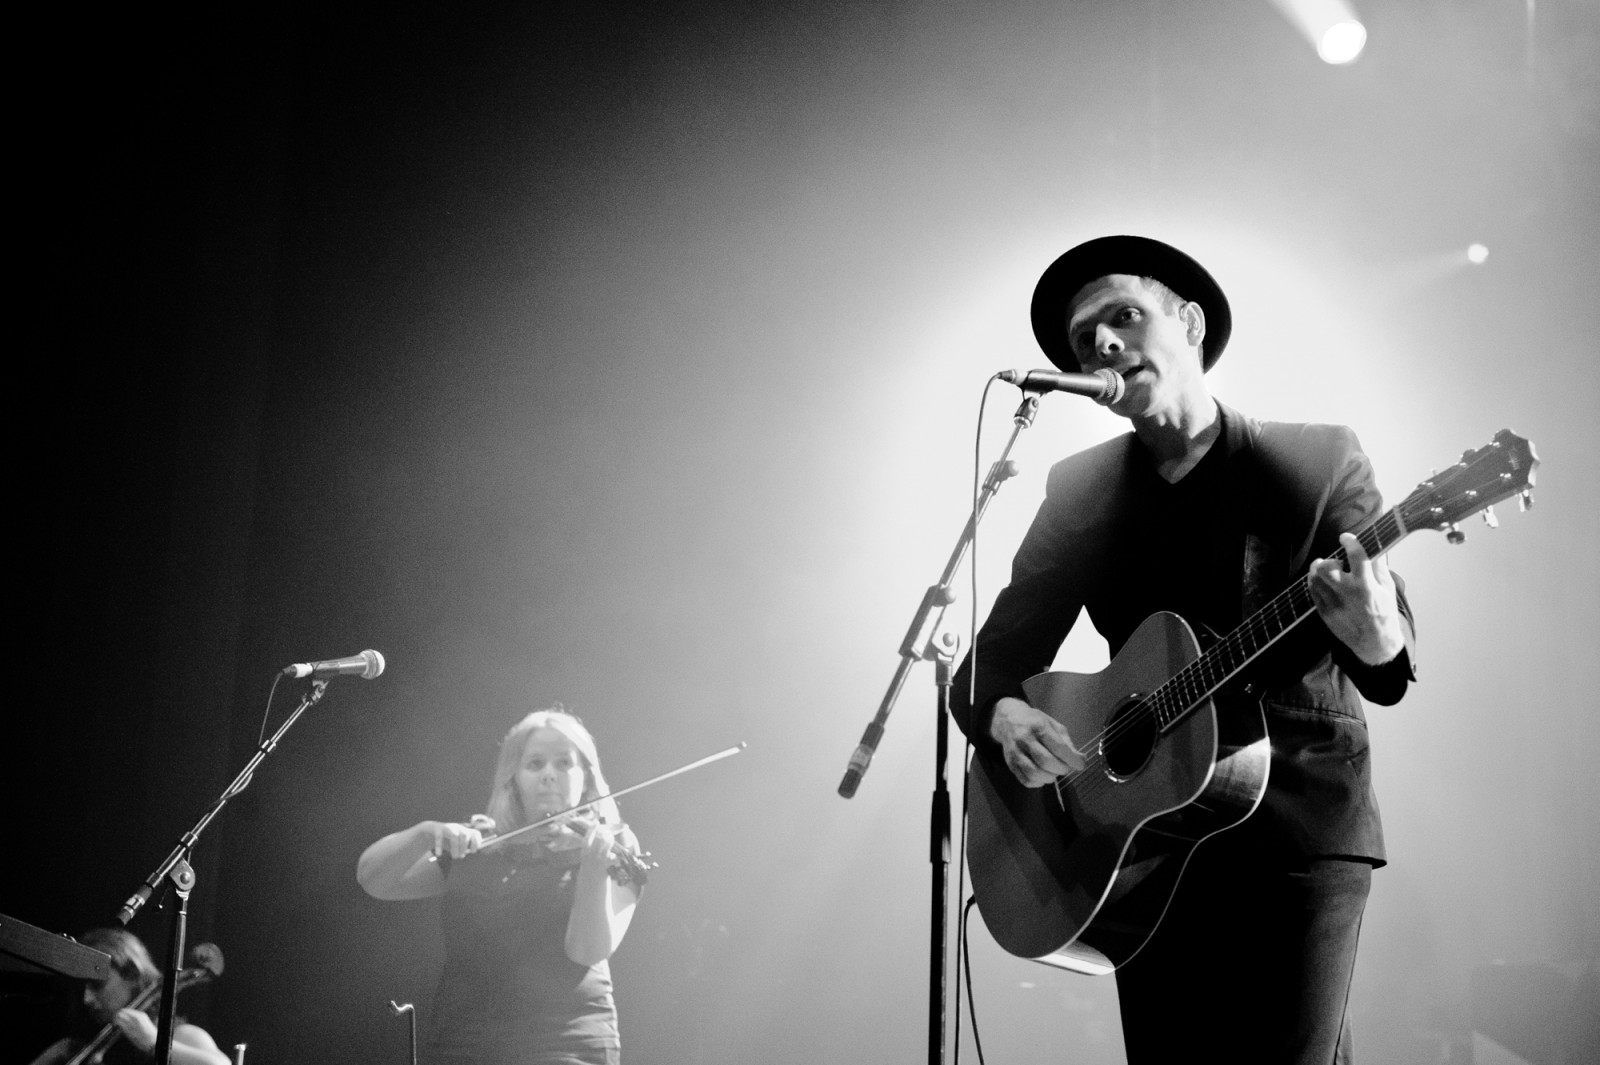 'Belle And Sebastian' In Concert At Le Grand Rex